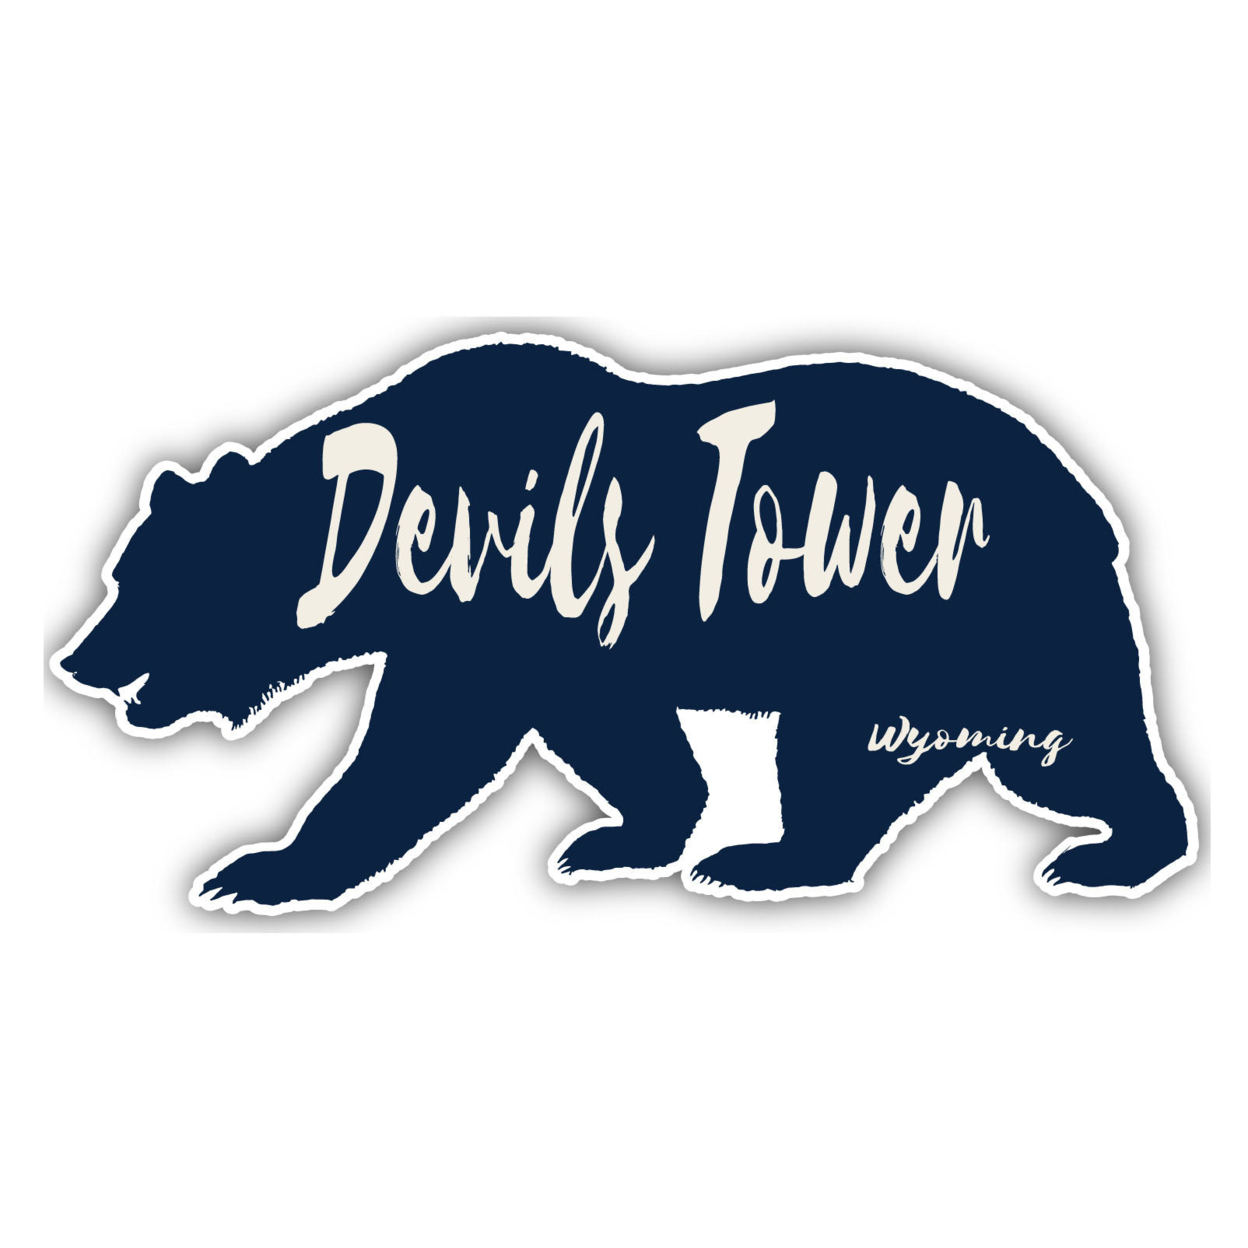 Devils Tower Wyoming Souvenir Decorative Stickers (Choose Theme And Size) - 4-Pack, 6-Inch, Bear